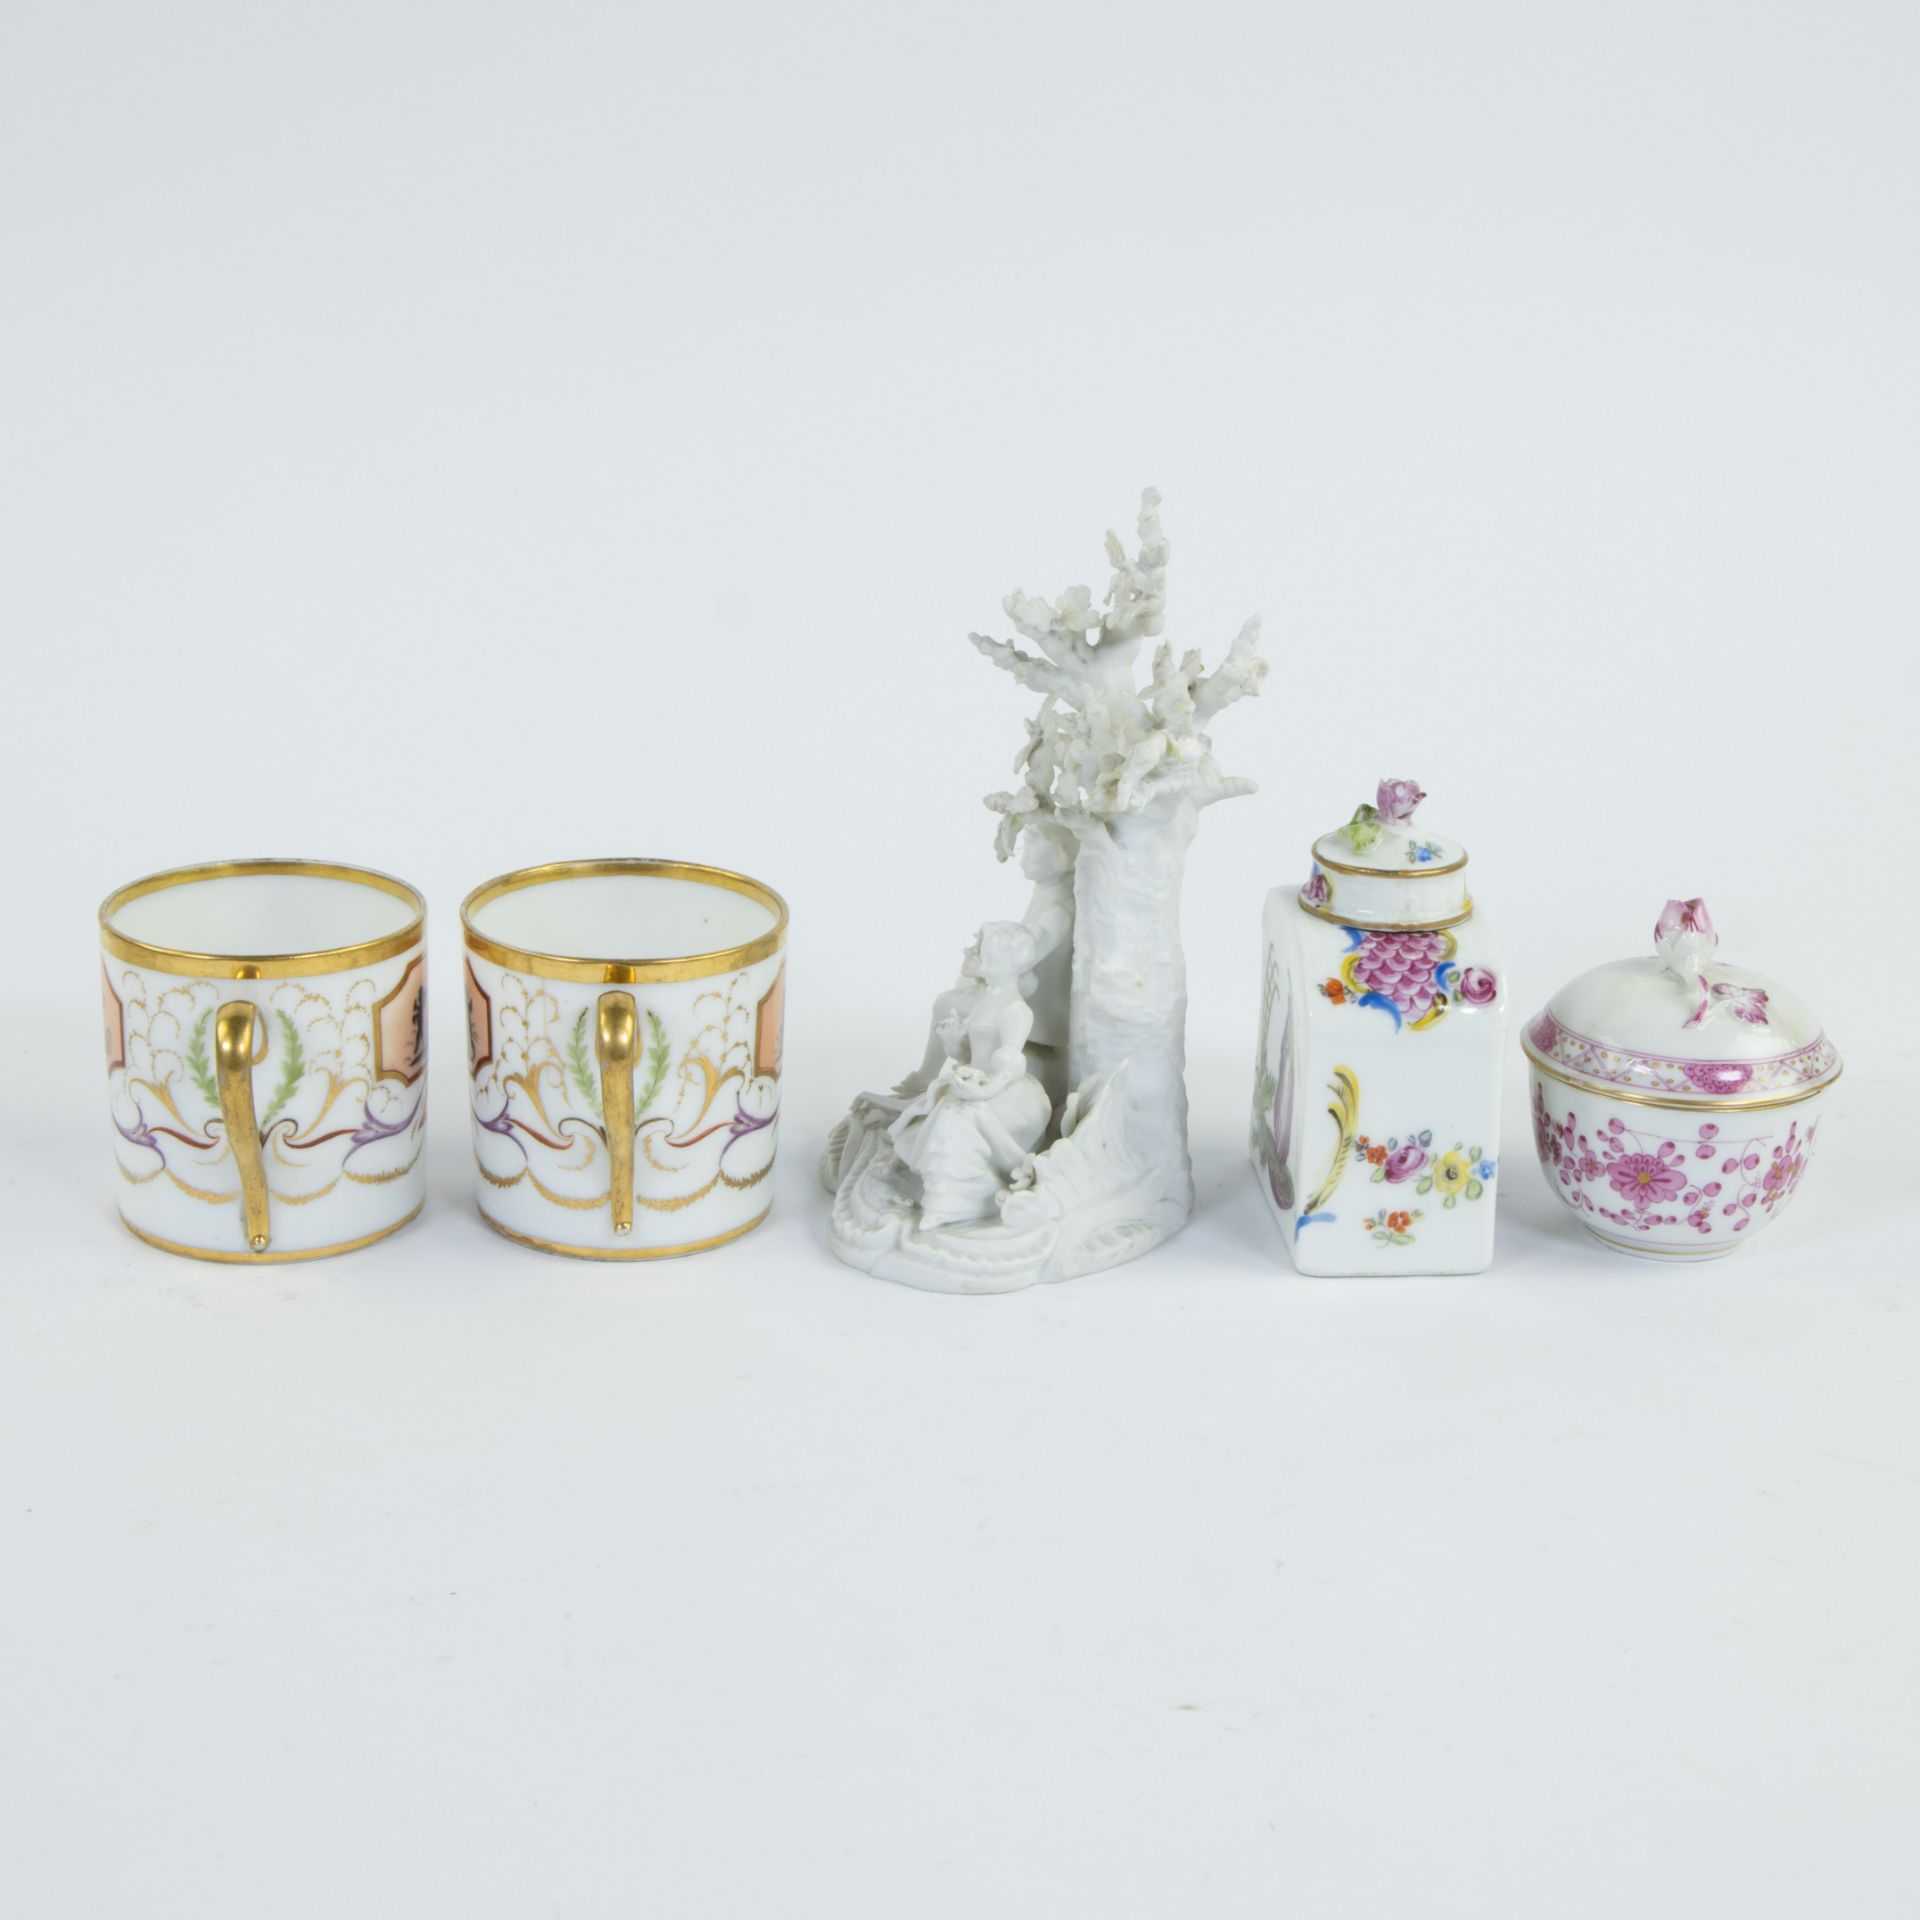 Collection of porcelain: 2 cups early 19th century Paris, tea caddy Meissen 18th century, pastoral g - Image 2 of 6